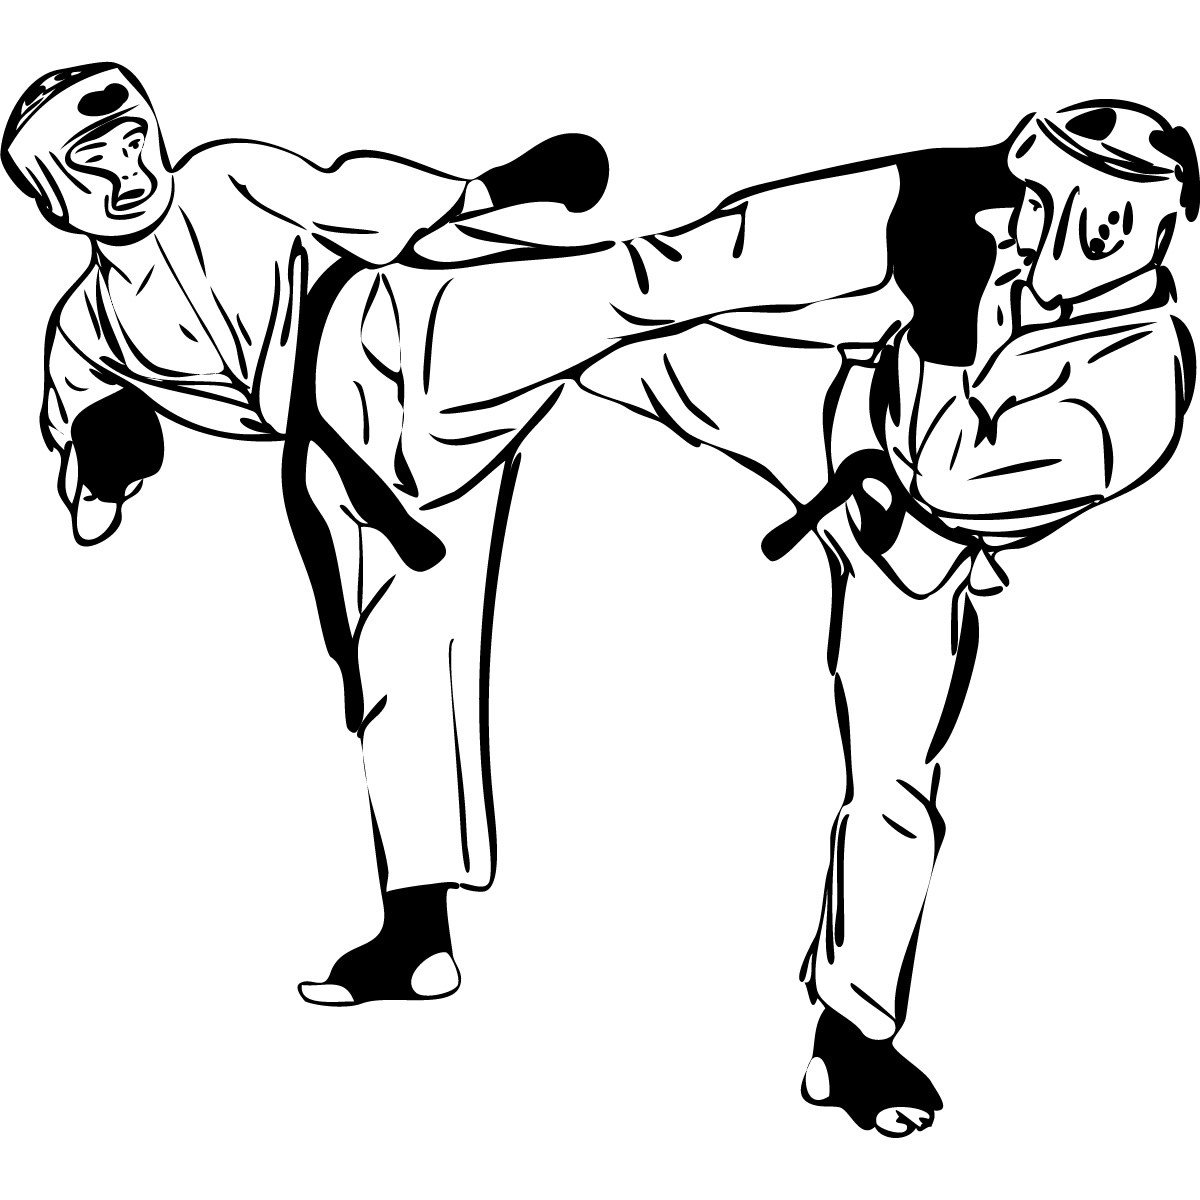 Two Karate Fighters Martial Arts Wall Art Stickers Wall Decal ...